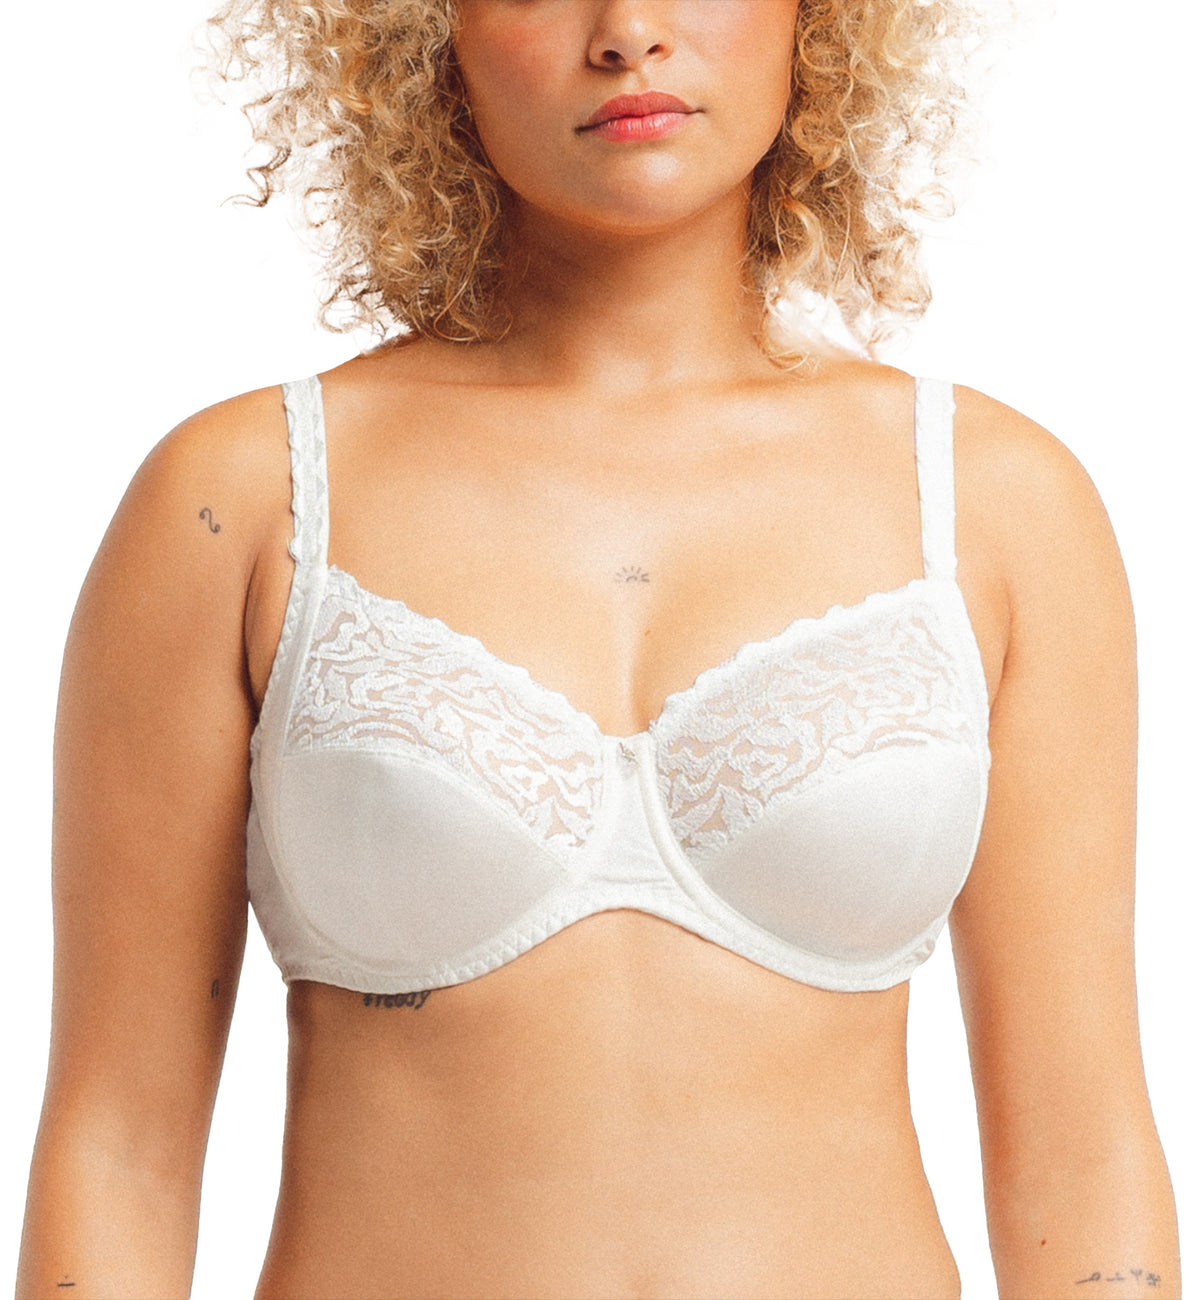 Louisa Bracq Electric Waves Full Cup Underwire Bra (49401),30G,Pearl - Pearl,30G